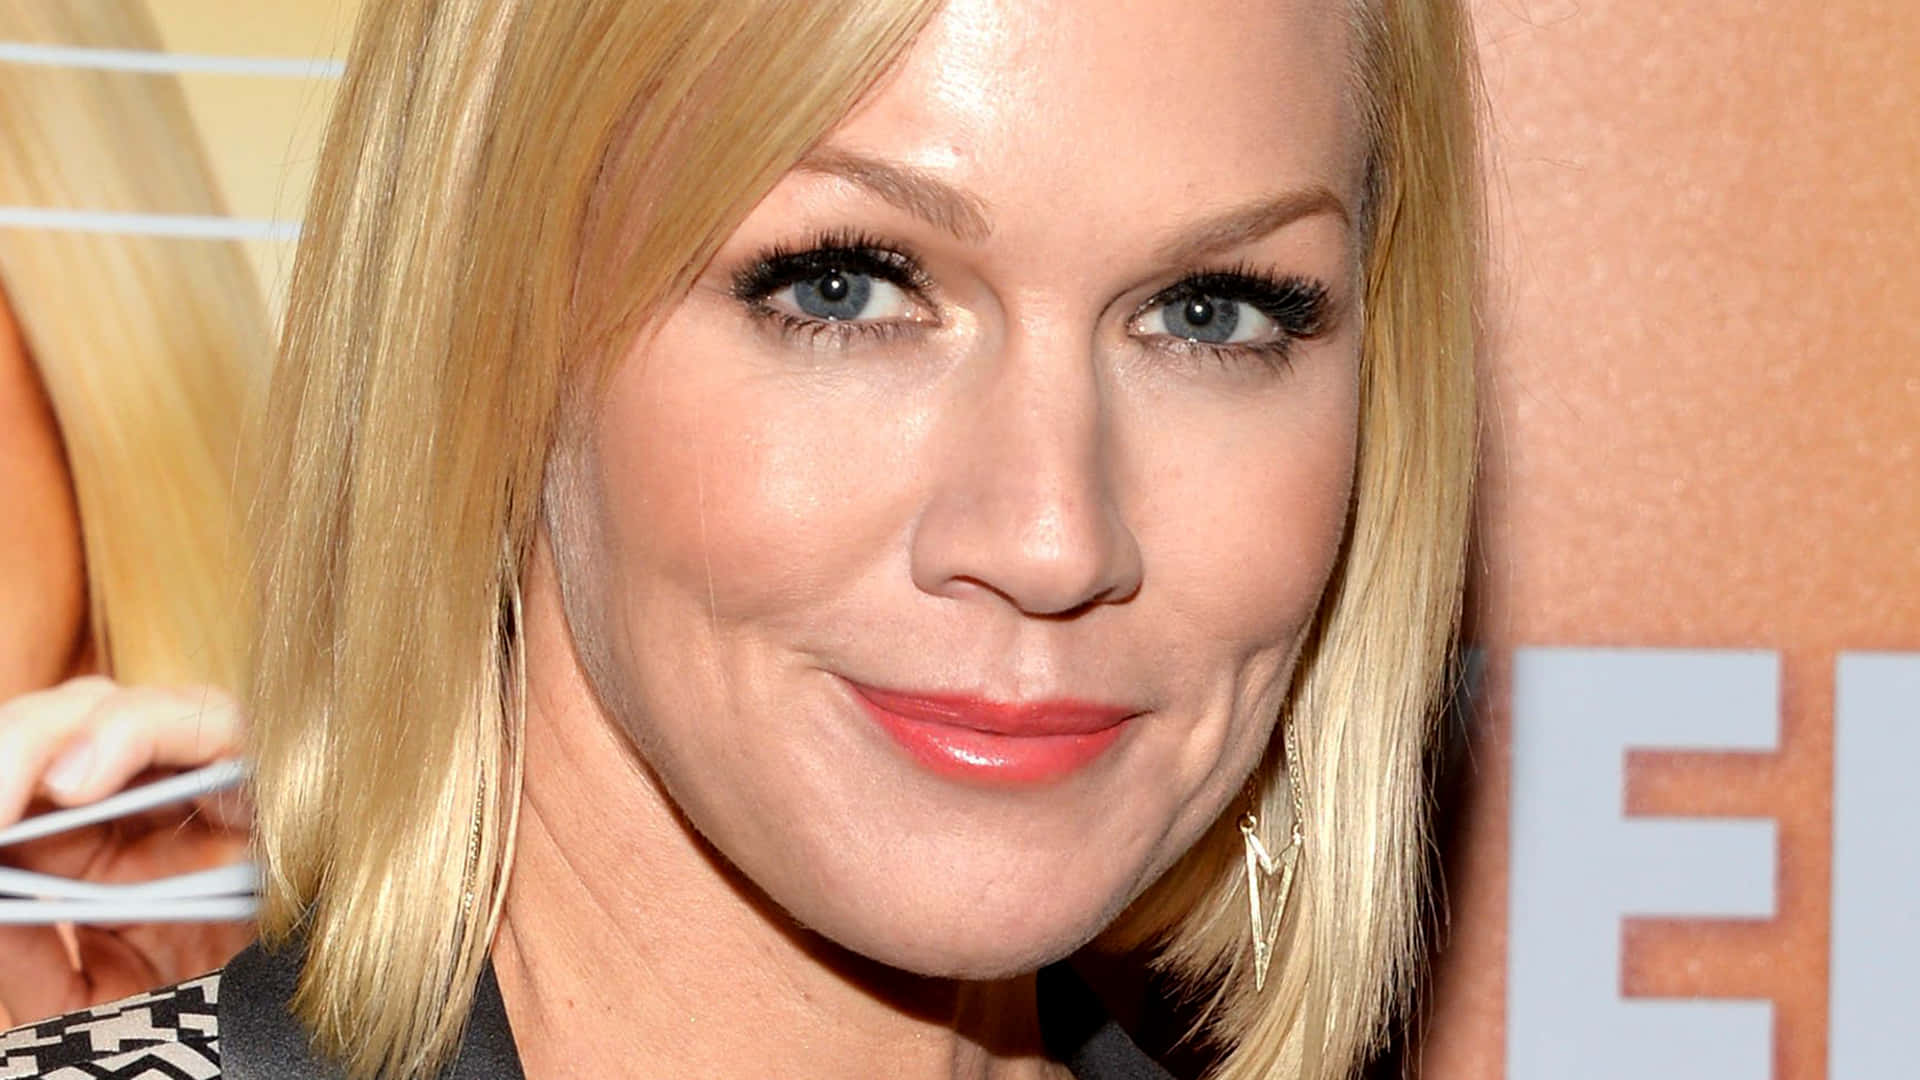 Caption: Jennie Garth smiling radiantly in a close-up portrait Wallpaper